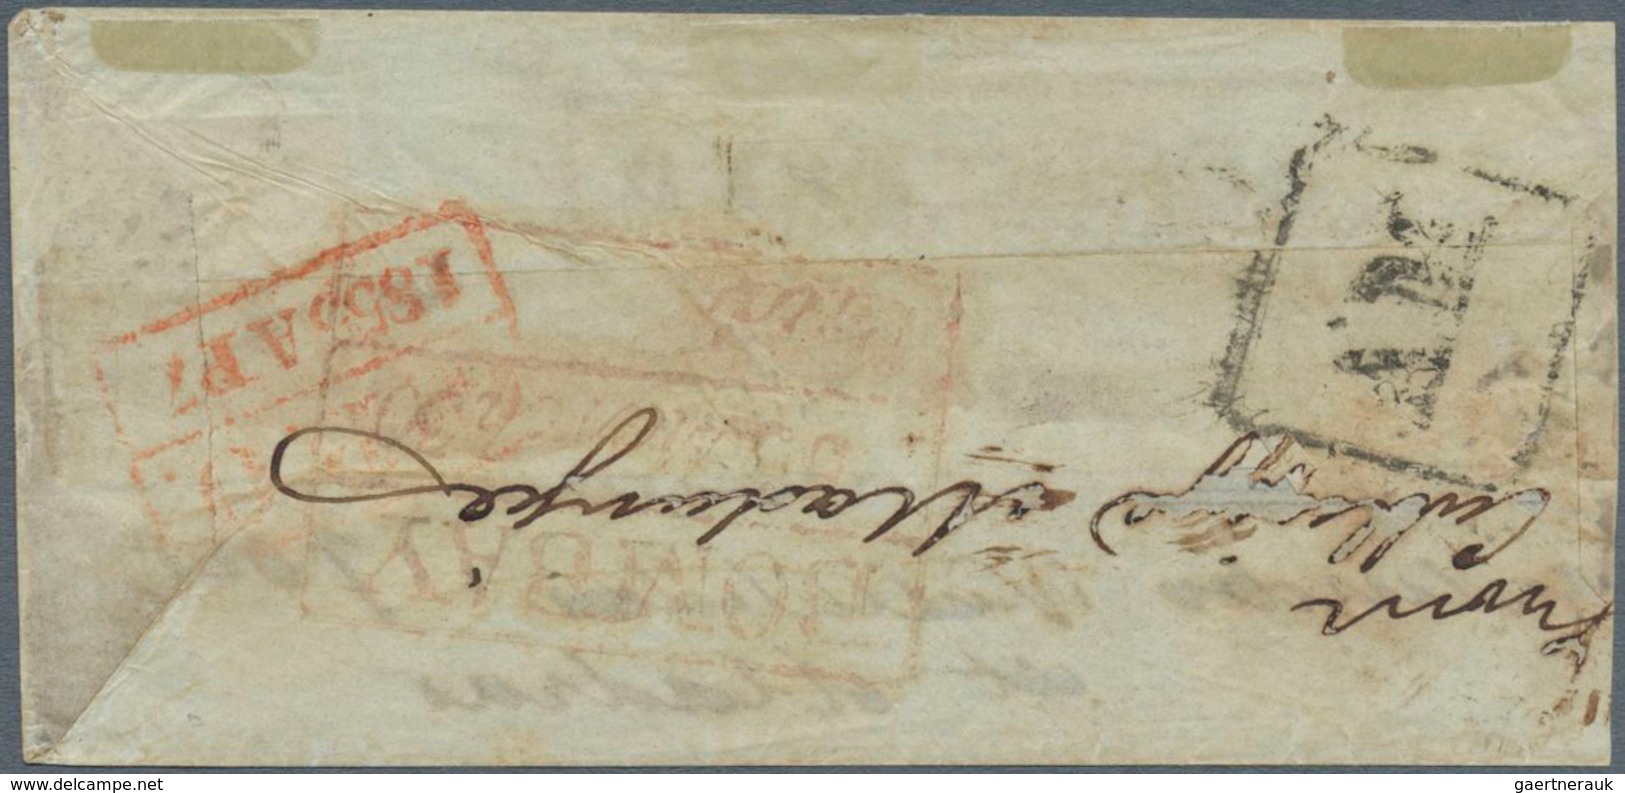 Indien: 1855 REGISTERED Cover From Bombay To Madras Franked By Lithographed 1a. Pale Red, Die II, Ti - 1852 Sind Province